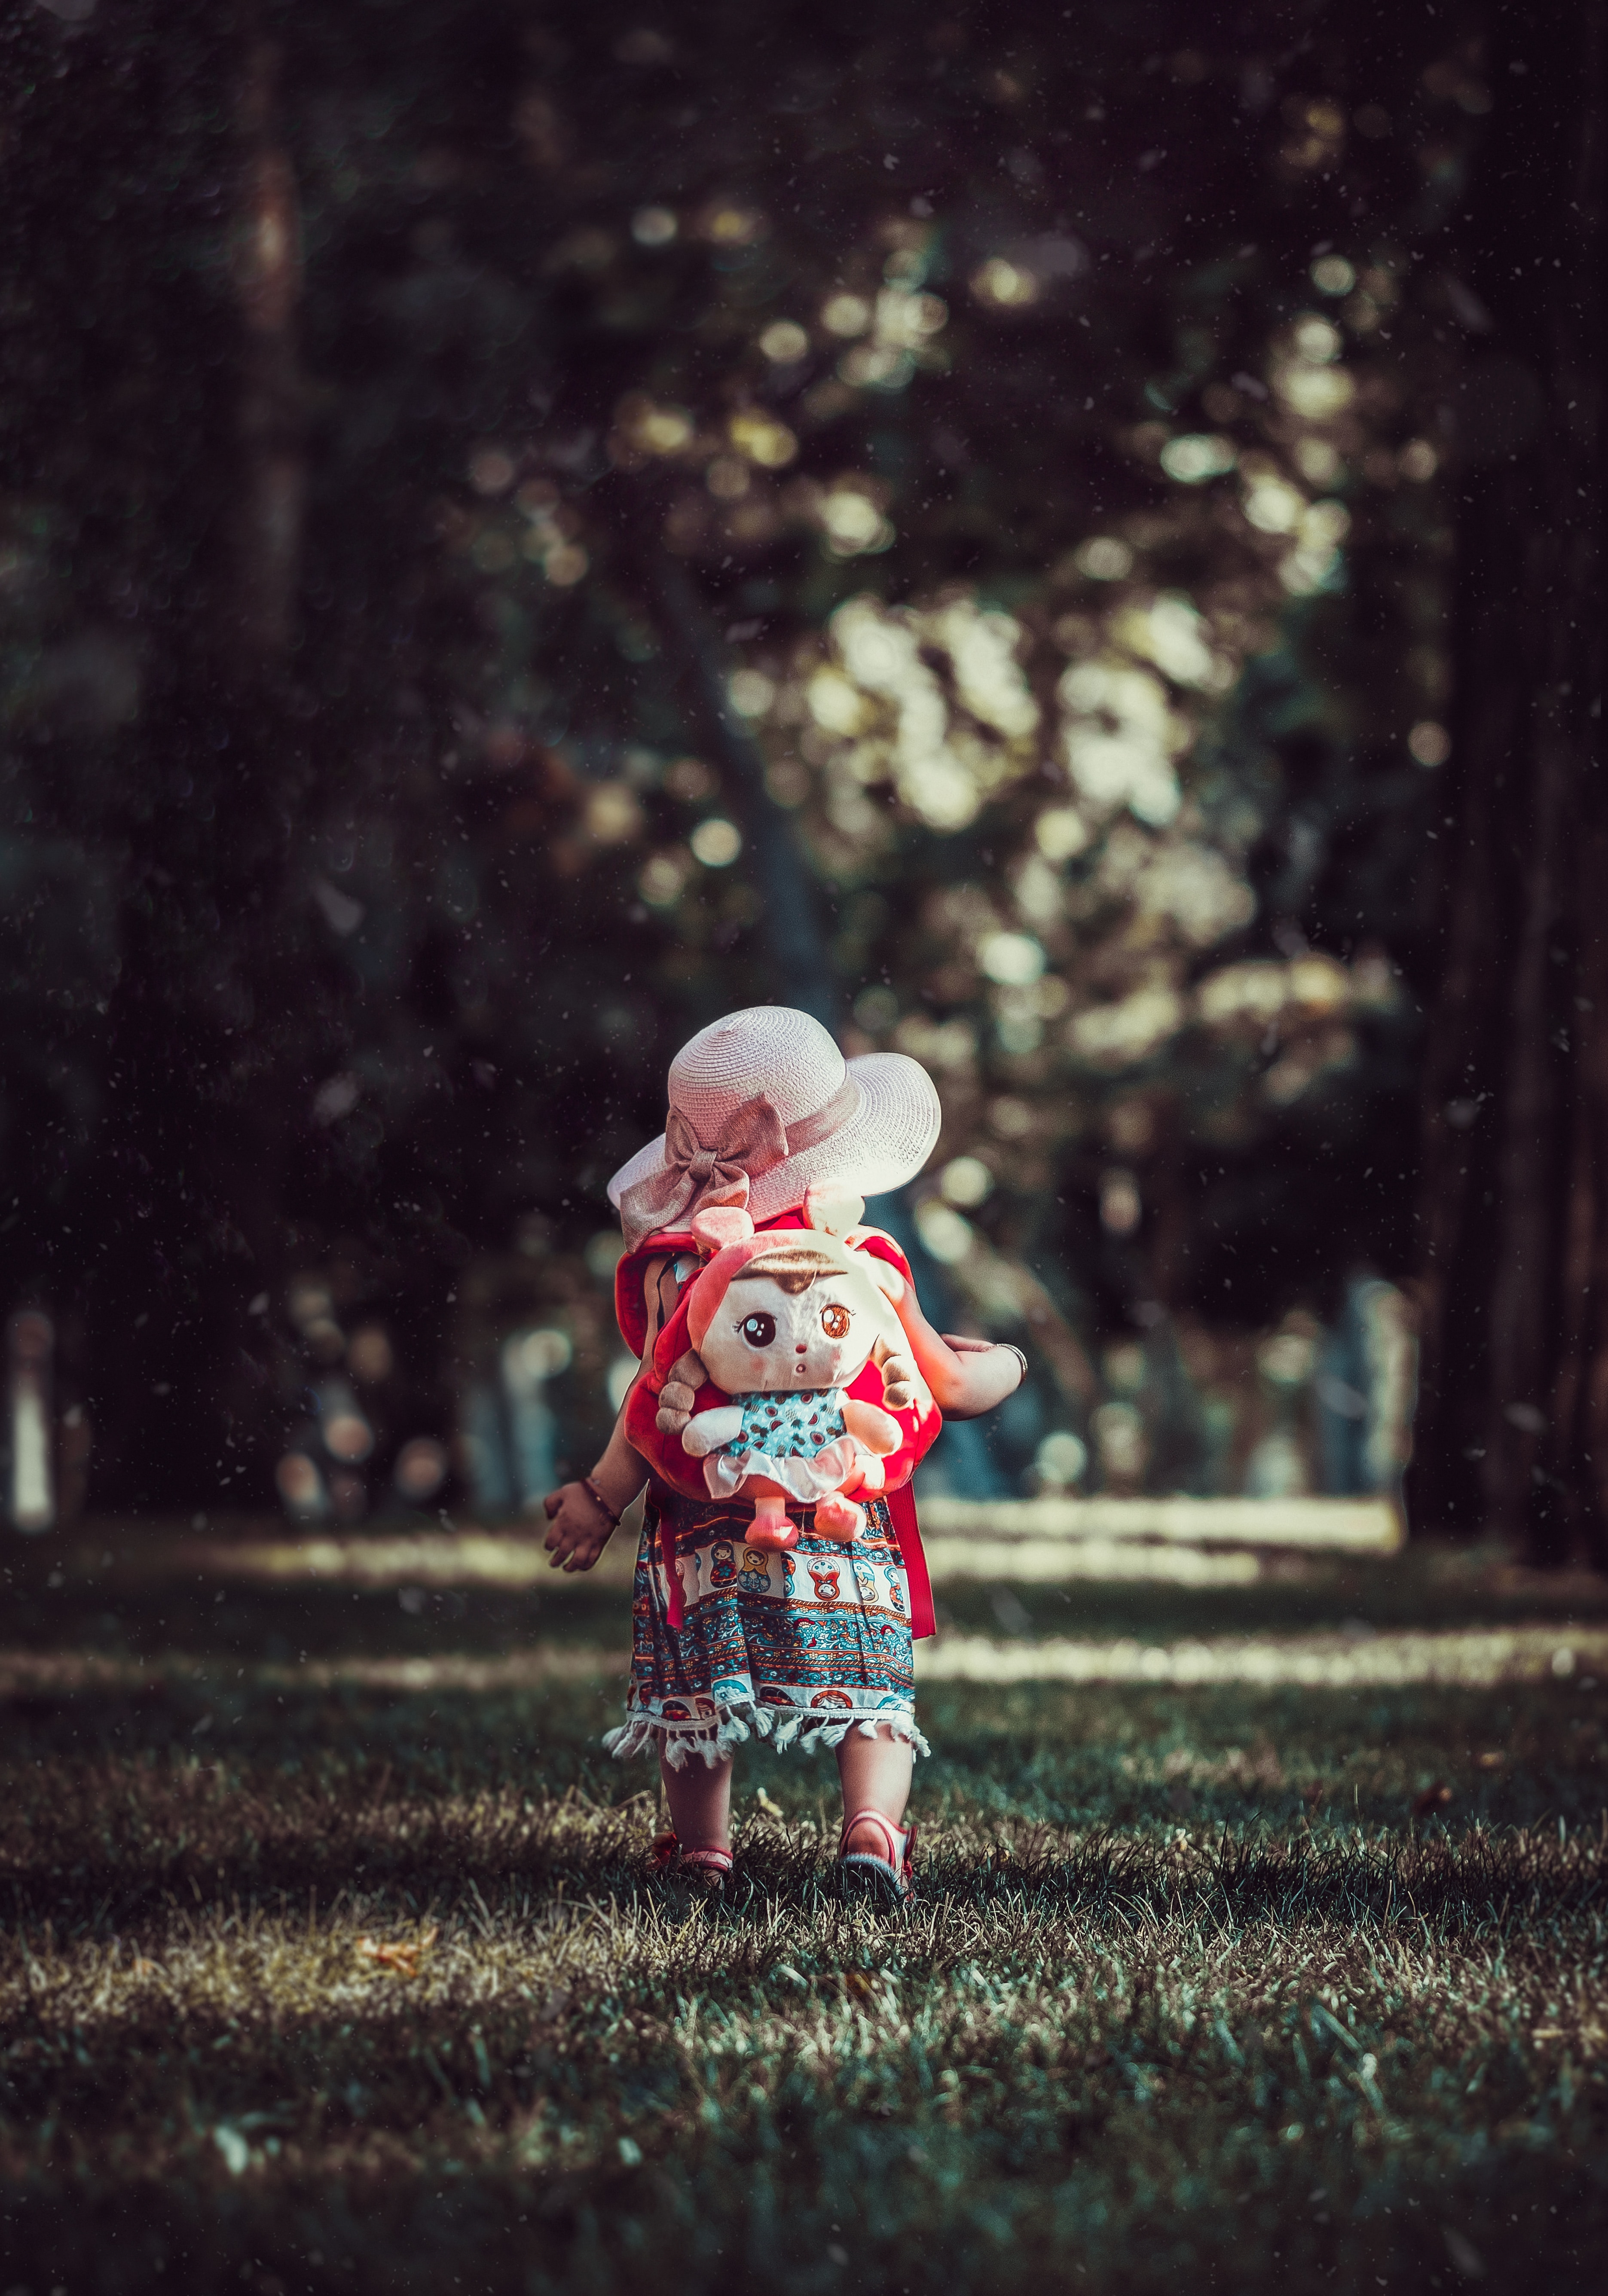 child, toy, miscellanea, miscellaneous, park, stroll, backpack, rucksack